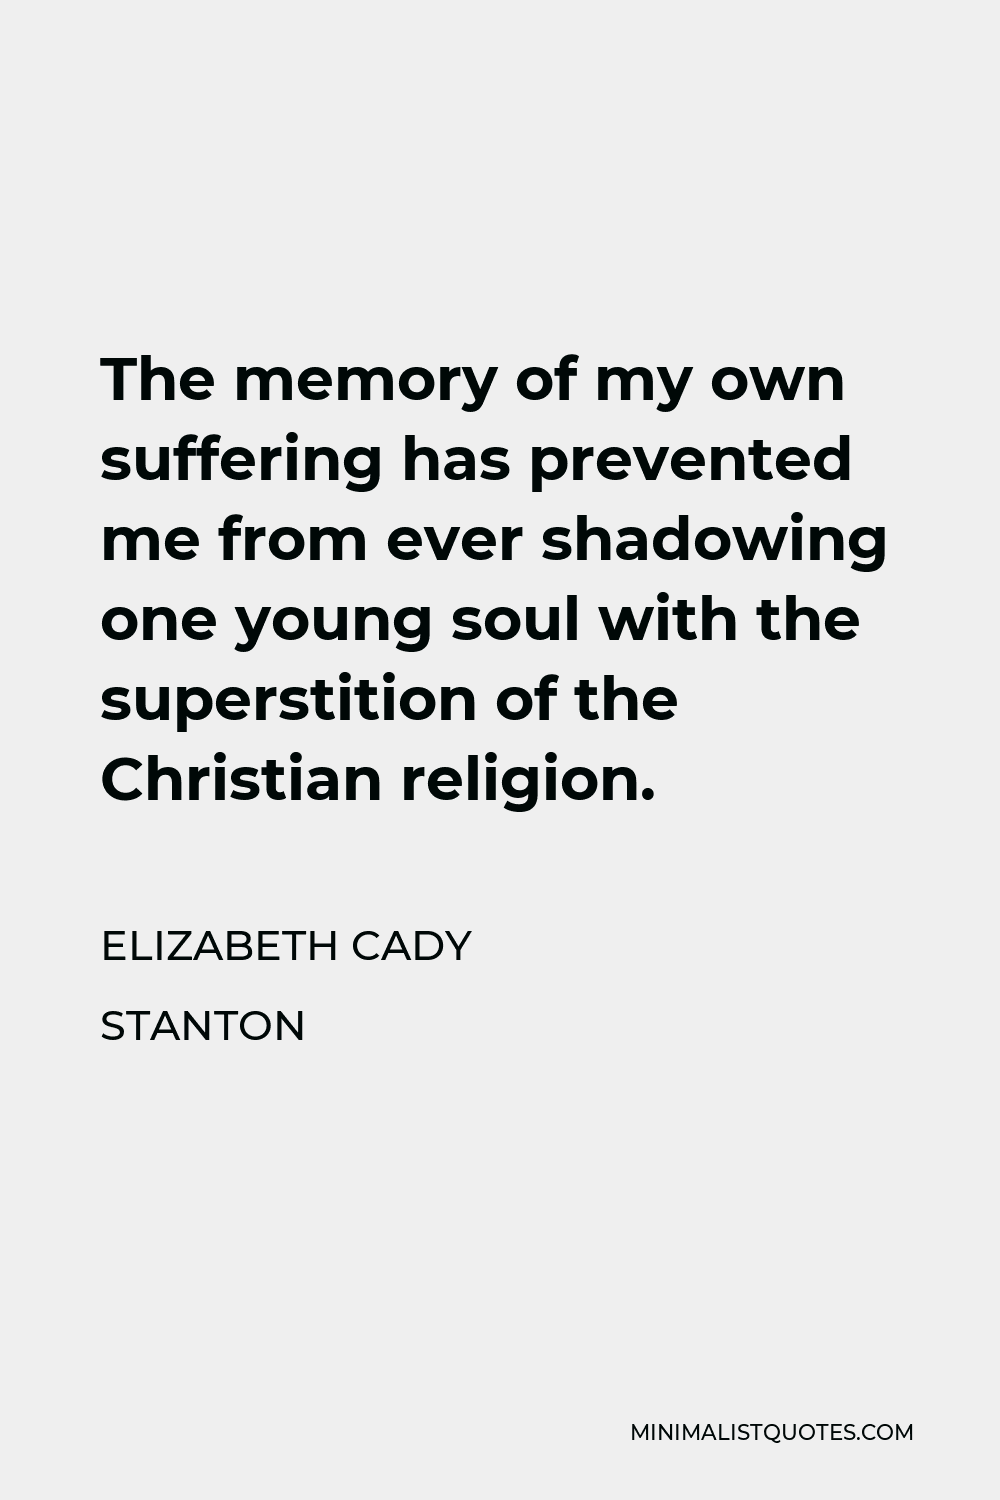 Elizabeth Cady Stanton Quote - The memory of my own suffering has prevented me from ever shadowing one young soul with the superstition of the Christian religion.